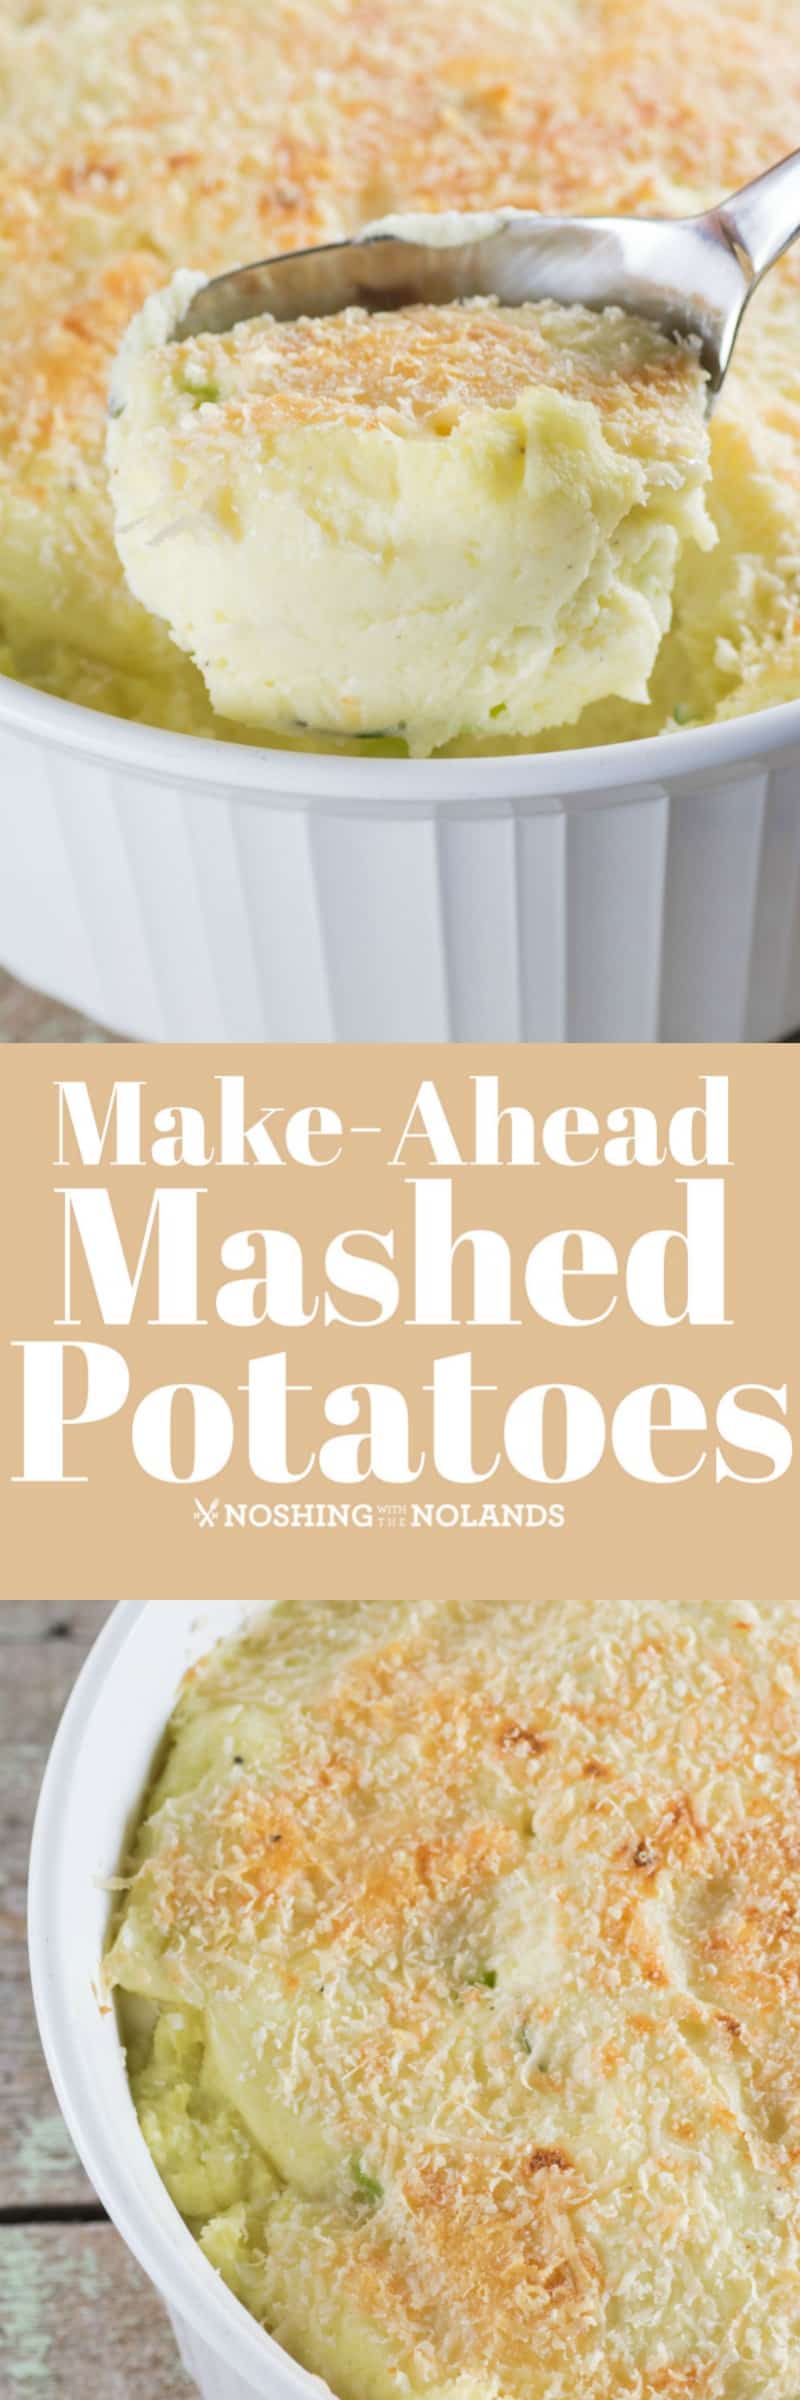 Make-Ahead Mashed Potatoes Recipe is the perfect side dish for the holidays!! #potatoes #makeahead #holidays #sidedish